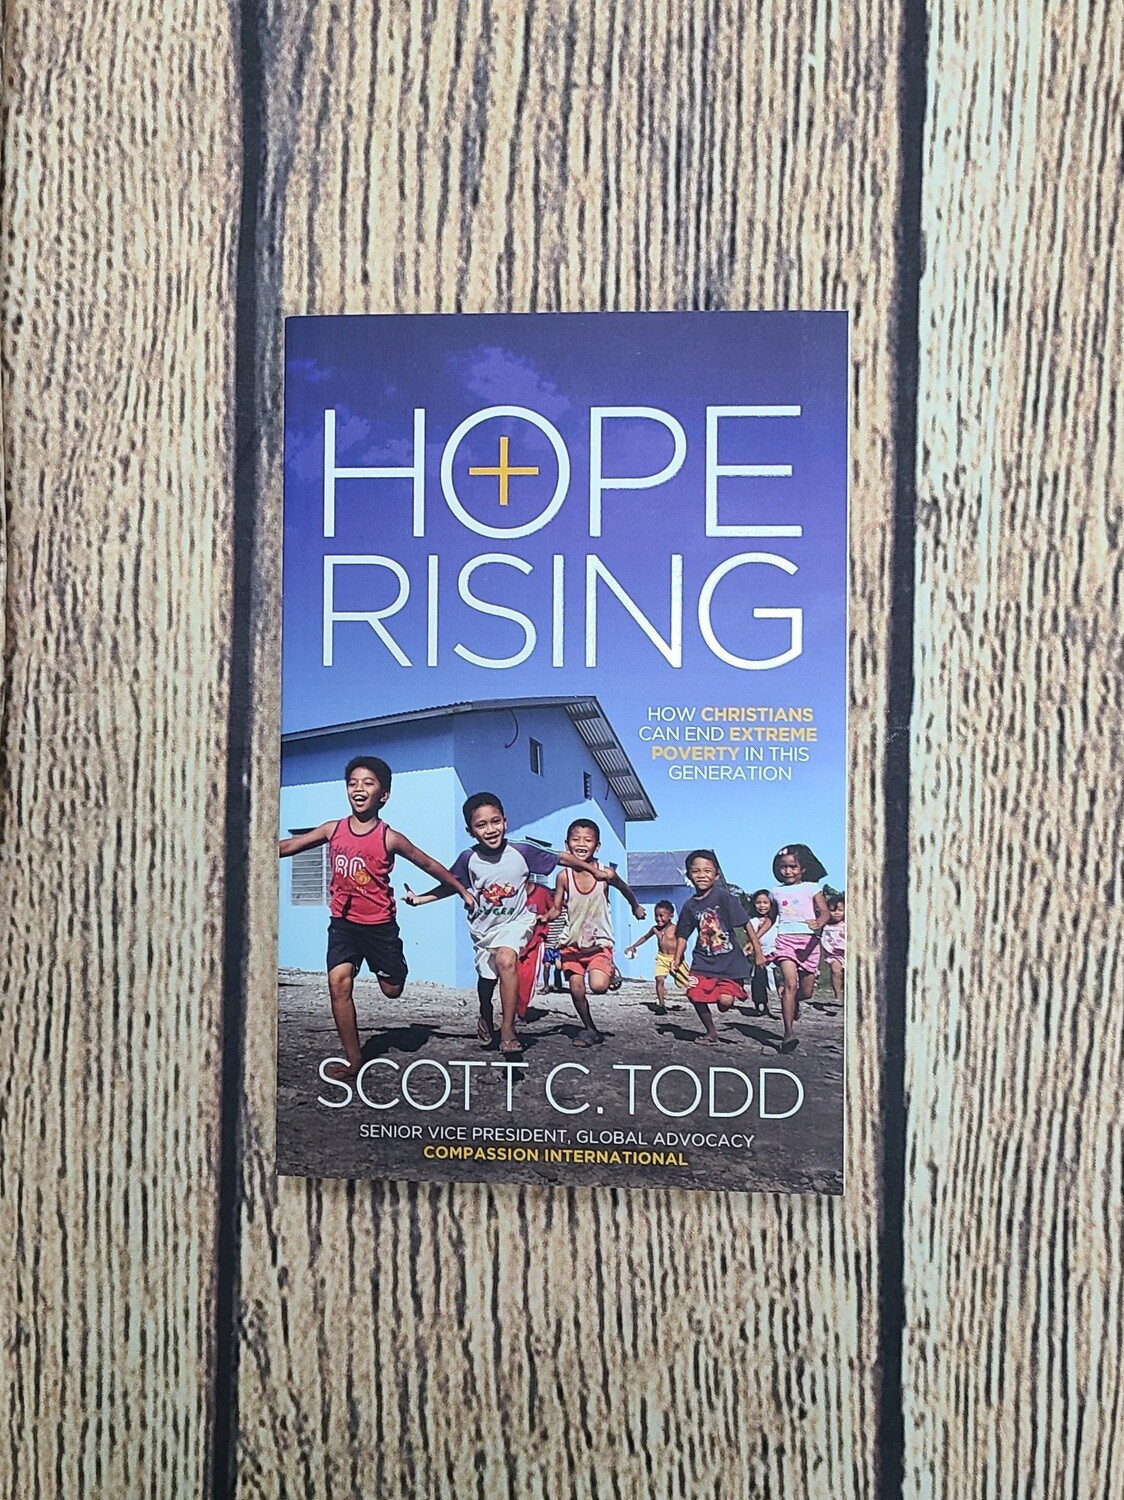 Hope Rising: How Christians can End Extreme Poverty in this Generation by Scott C. Todd